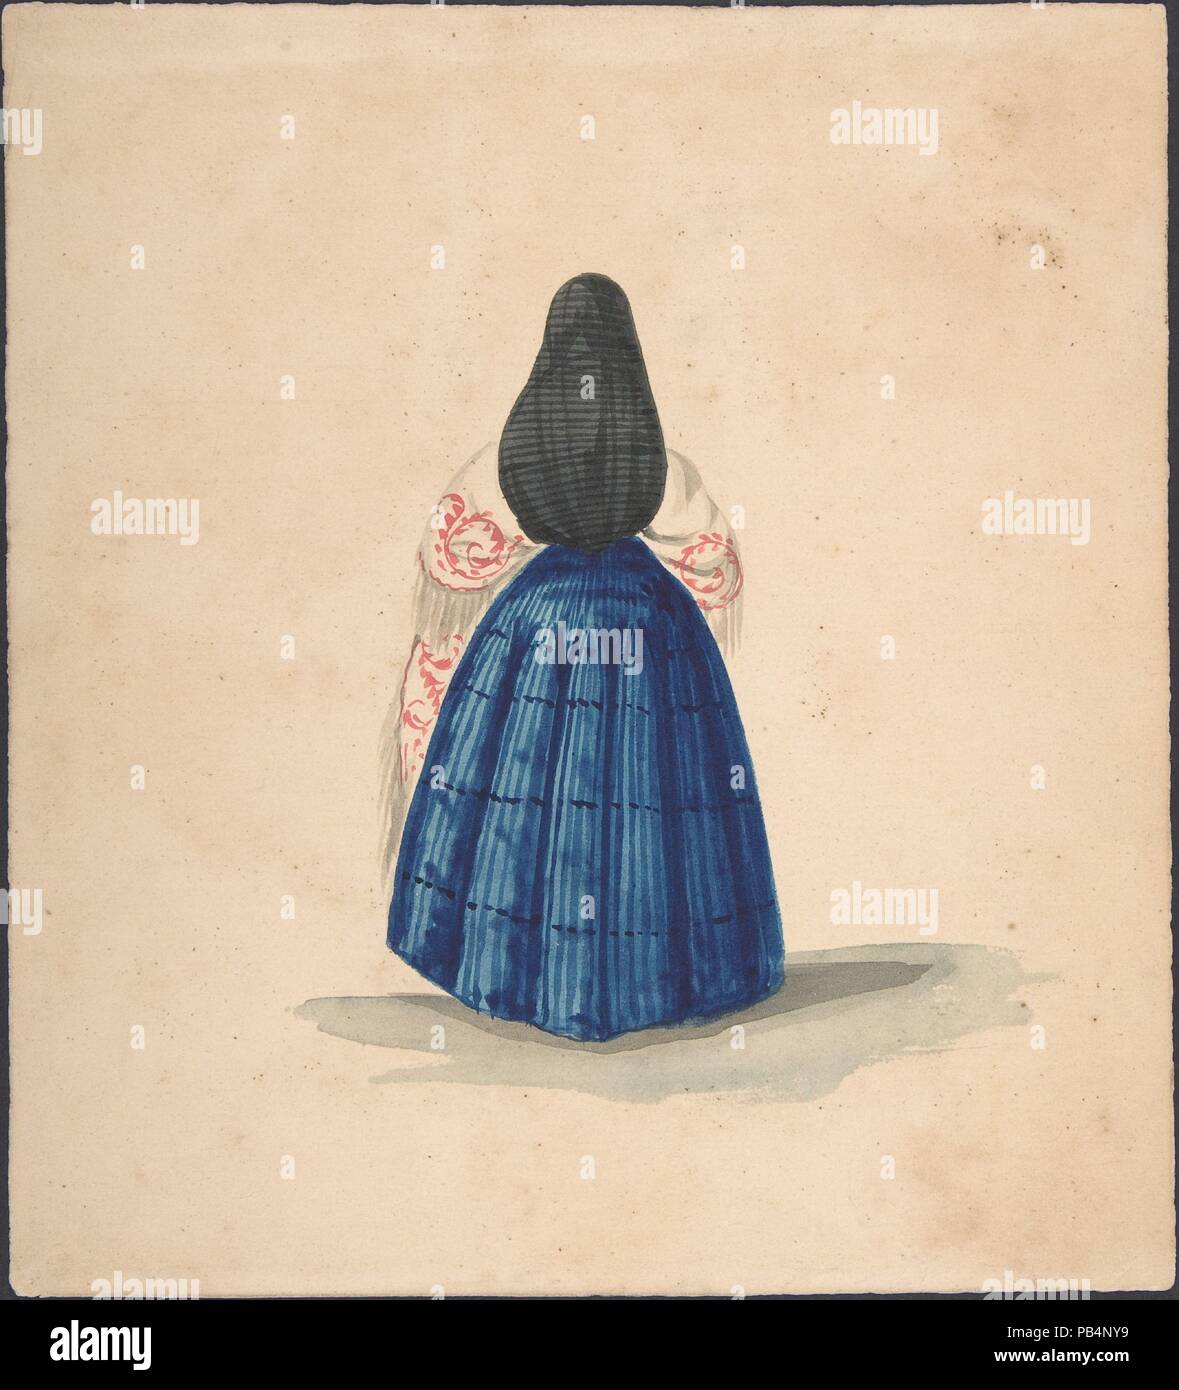 A Standing Woman Seen from the Back. Artist: Anonymous, Peruvian, 19th century. Dimensions: sheet: 9 1/8 x 9 1/4 in. (23.2 x 23.5 cm). Date: 1840-50. Museum: Metropolitan Museum of Art, New York, USA. Stock Photo